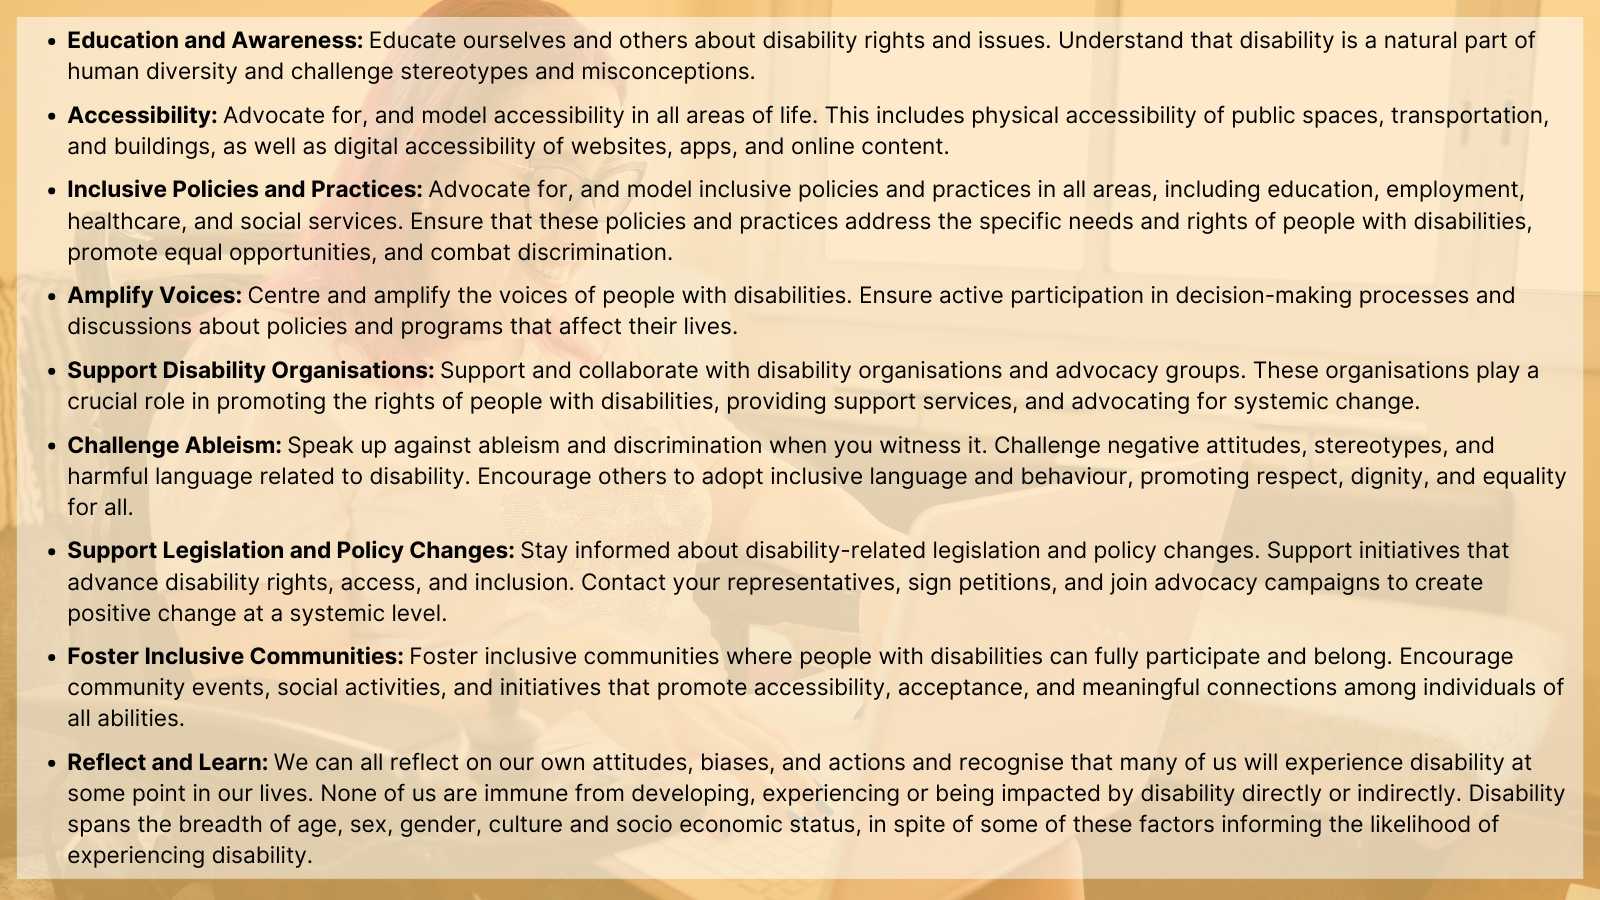 A partially transparent image of a woman using a wheelchair and her laptop, through a light orange filter. Black text is overlayed and describes actions people can take and things to consider in disability inclusion: "Education and Awareness: Educate ourselves and others about disability rights and issues. Understand that disability is a natural part of human diversity and challenge stereotypes and misconceptions. Accessibility: Advocate for, and model accessibility in all areas of life. This includes physical accessibility of public spaces, transportation, and buildings, as well as digital accessibility of websites, apps, and online content. Inclusive Policies and Practices: Advocate for, and model inclusive policies and practices in all areas, including education, employment, healthcare, and social services. Ensure that these policies and practices address the specific needs and rights of people with disabilities, promote equal opportunities, and combat discrimination. Amplify Voices: Centre and amplify the voices of people with disabilities. Ensure active participation in decision-making processes and discussions about policies and programs that affect their lives. Support Disability Organisations: Support and collaborate with disability organisations and advocacy groups. These organisations play a crucial role in promoting the rights of people with disabilities, providing support services, and advocating for systemic change. Challenge Ableism: Speak up against ableism and discrimination when you witness it. Challenge negative attitudes, stereotypes, and harmful language related to disability. Encourage others to adopt inclusive language and behaviour, promoting respect, dignity, and equality for all. Support Legislation and Policy Changes: Stay informed about disability-related legislation and policy changes. Support initiatives that advance disability rights, access, and inclusion. Contact your representatives, sign petitions, and join advocacy campaigns to create positive change at a systemic level. Foster Inclusive Communities: Foster inclusive communities where people with disabilities can fully participate and belong. Encourage community events, social activities, and initiatives that promote accessibility, acceptance, and meaningful connections among individuals of all abilities. Reflect and Learn: We can all reflect on our own attitudes, biases, and actions and recognise that many of us will experience disability at some point in our lives. None of us are immune from developing, experiencing or being impacted by disability directly or indirectly. Disability spans the breadth of age, sex, gender, culture and socio economic status, in spite of some of these factors informing the likelihood of experiencing disability."